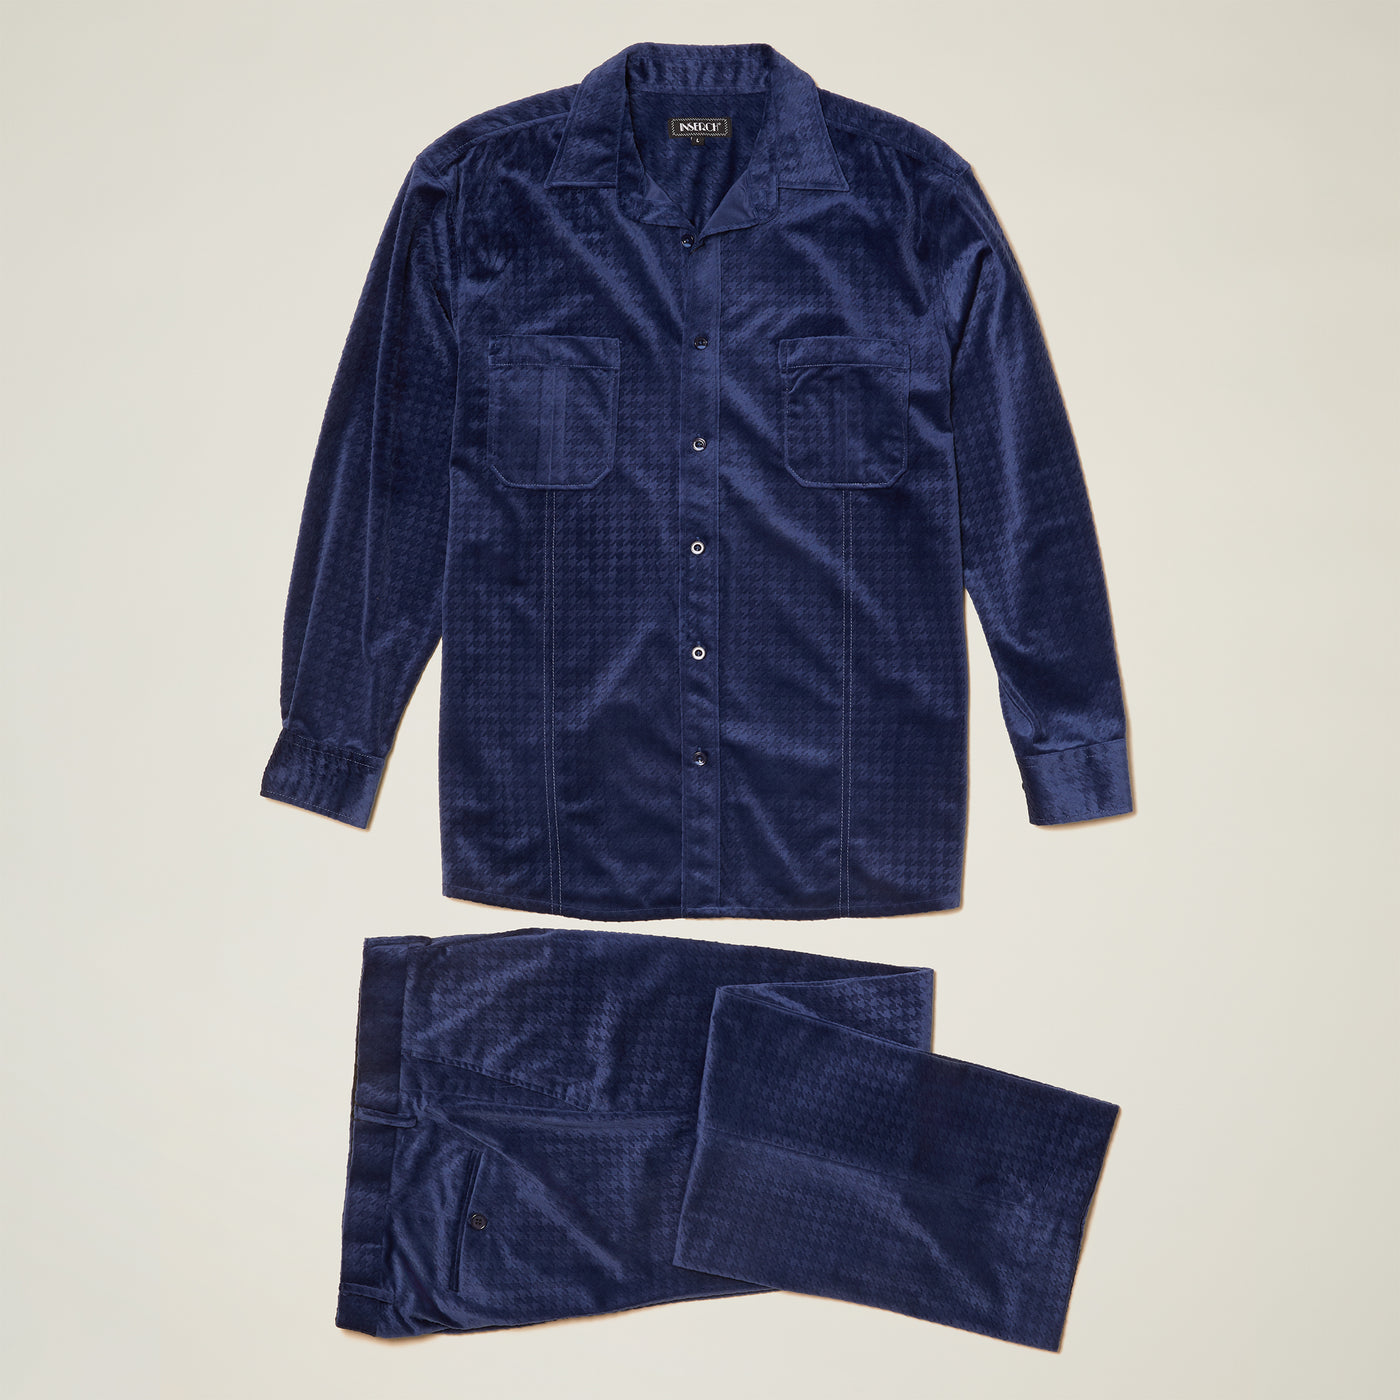 Velvet Houndstooth Shirt and Pant Set - INSERCH